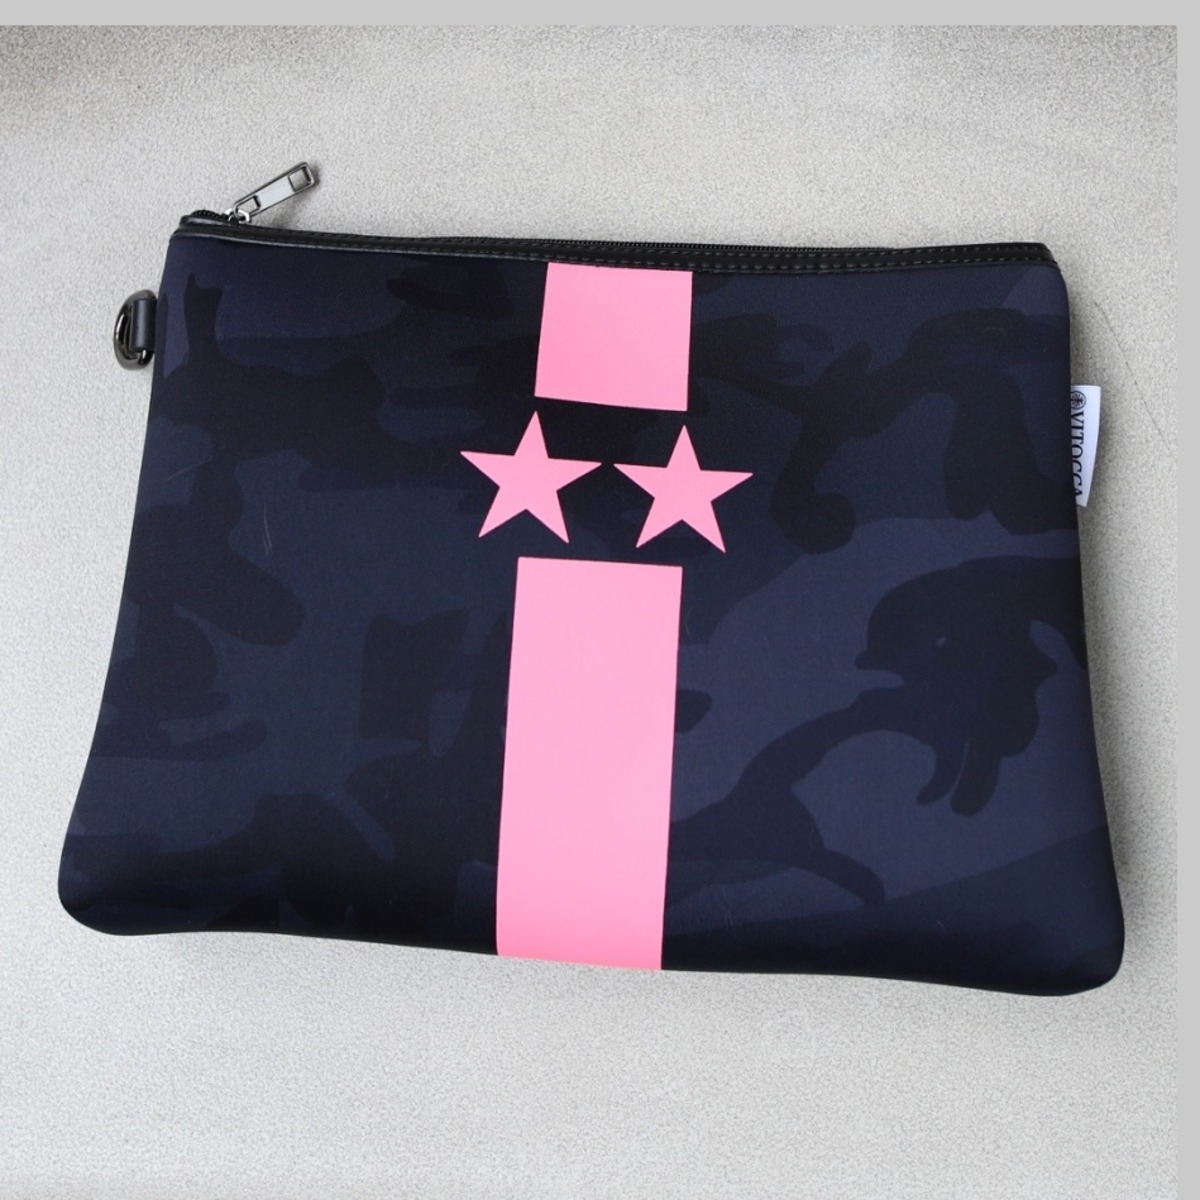 NEON Color pink clutch | vitocca powered by BASE